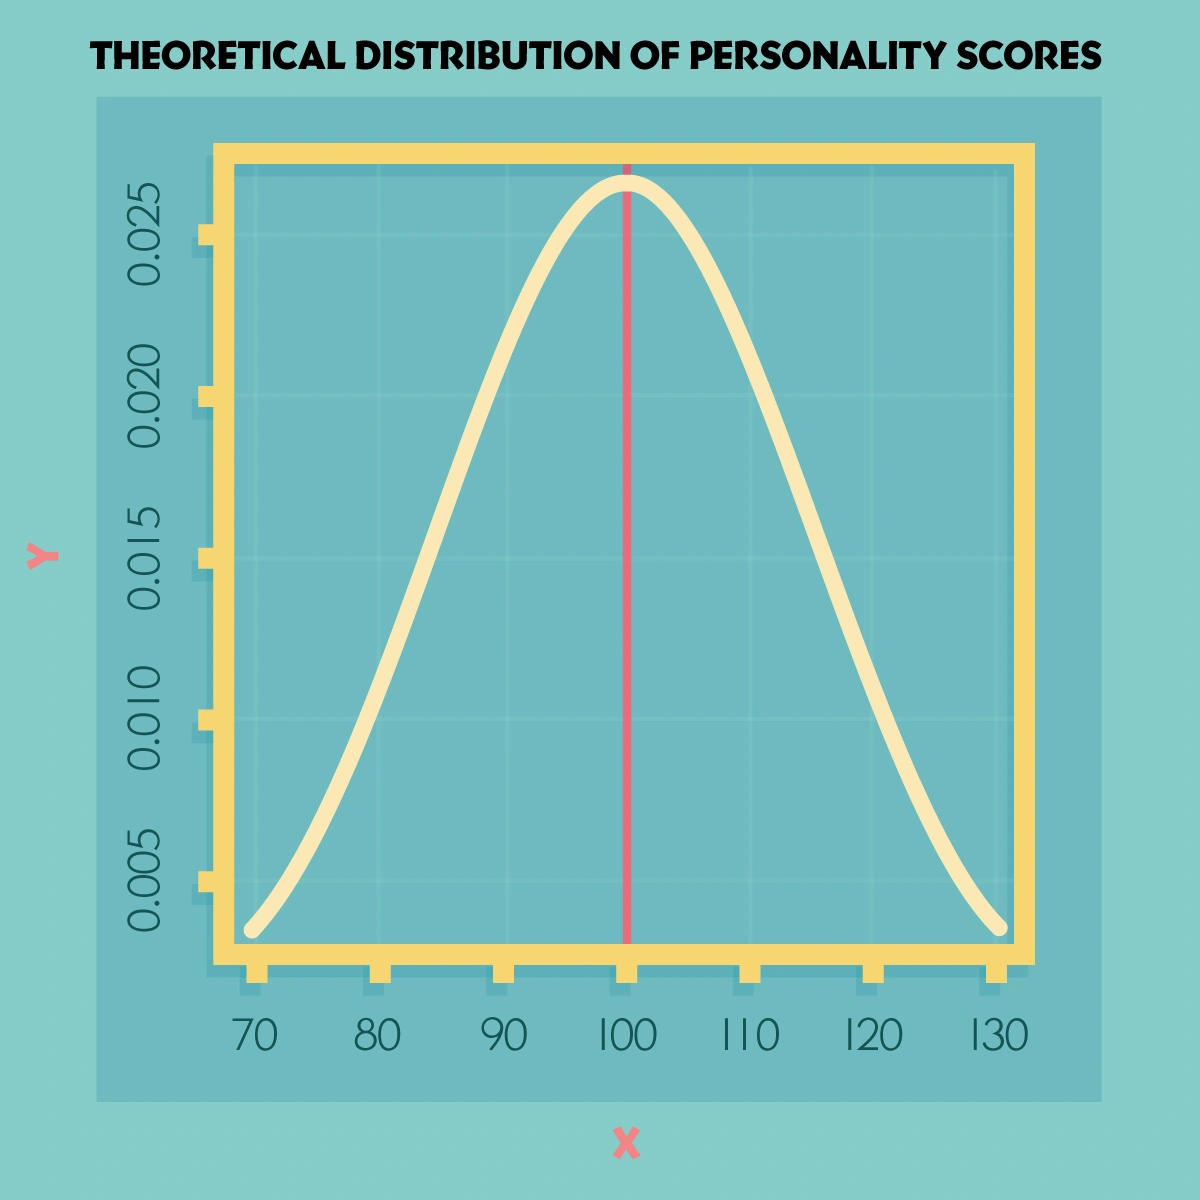 theoretical-distribution-of-personali...